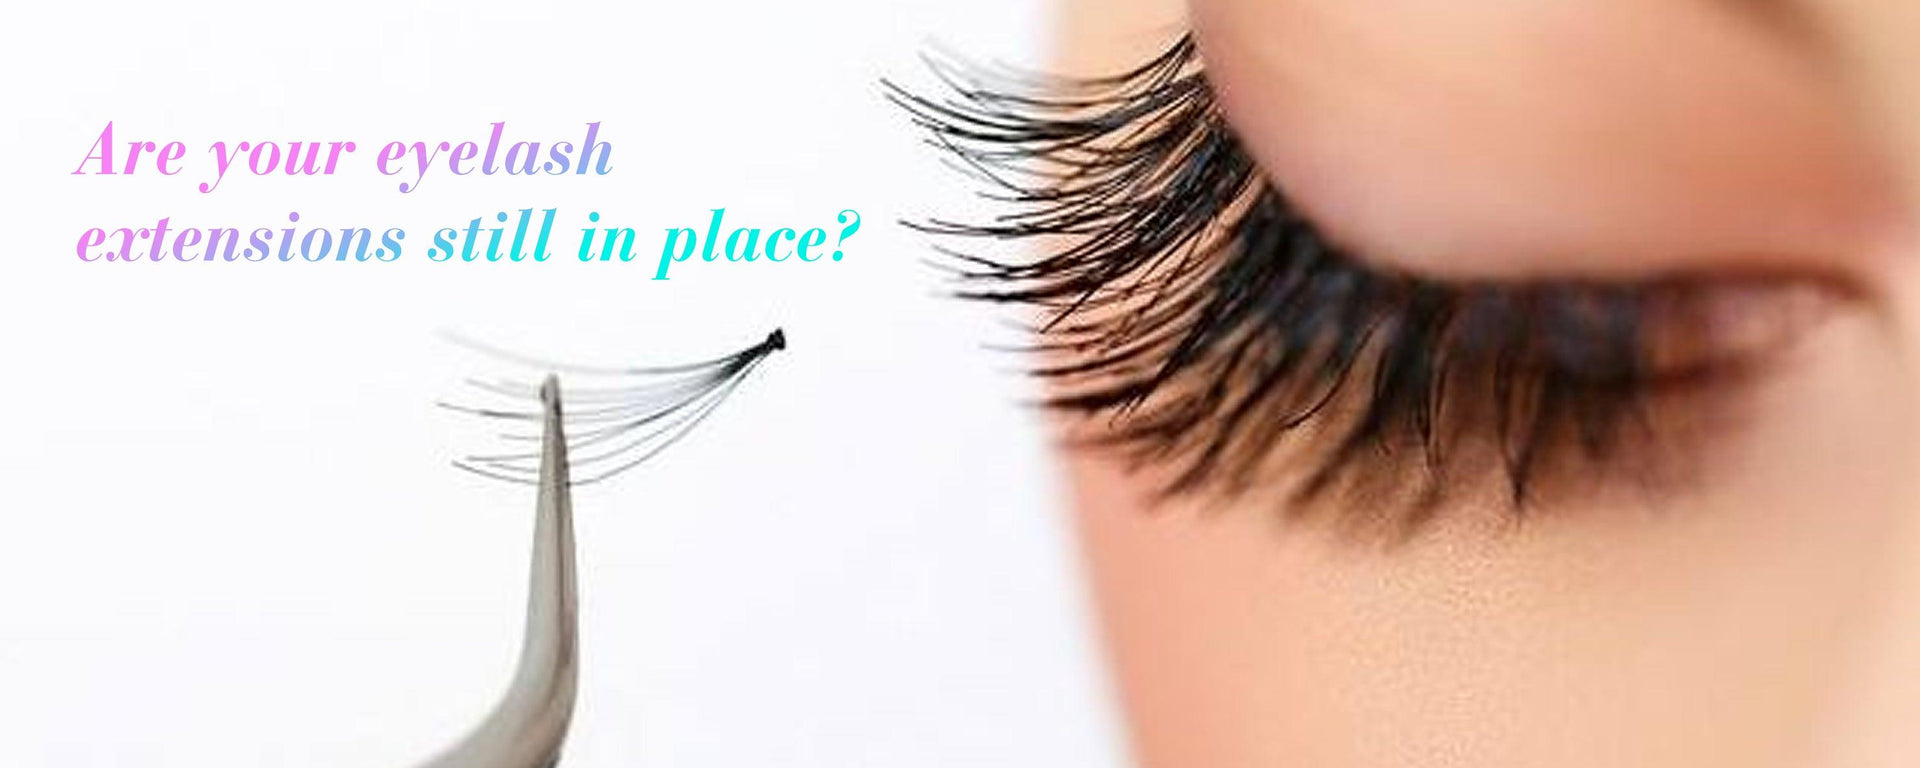 Are your eyelash extensions still in place? - VAVALASH